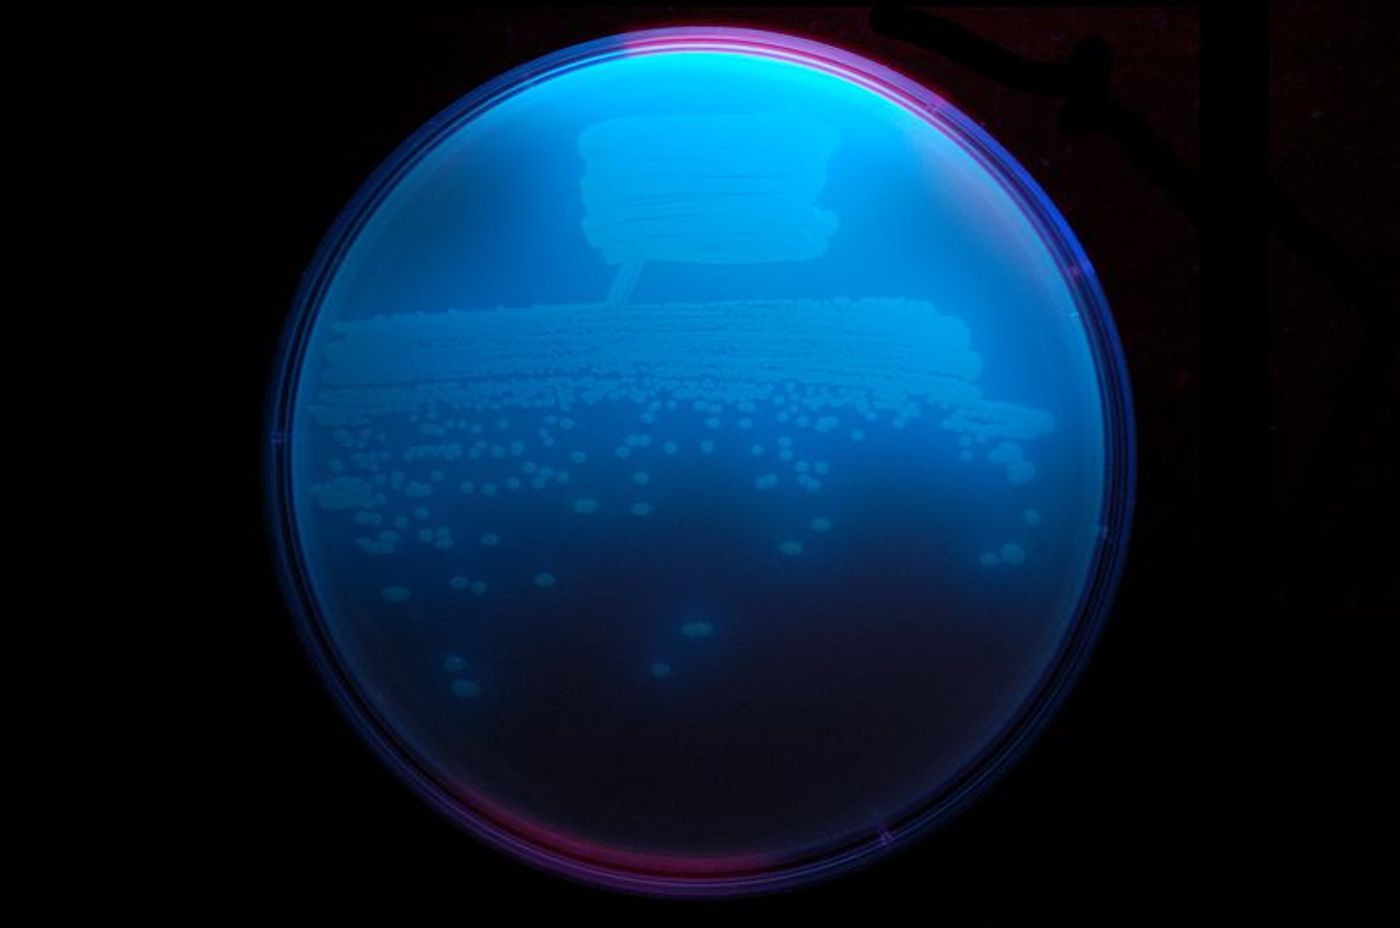 The bacterium Pseudomonas fluorescens streaked to single colonies on Tryptone-Yeast Extract (TY) agar and visualized under ultraviolet light. / Credit: Wikipedia/Ninjatacoshell